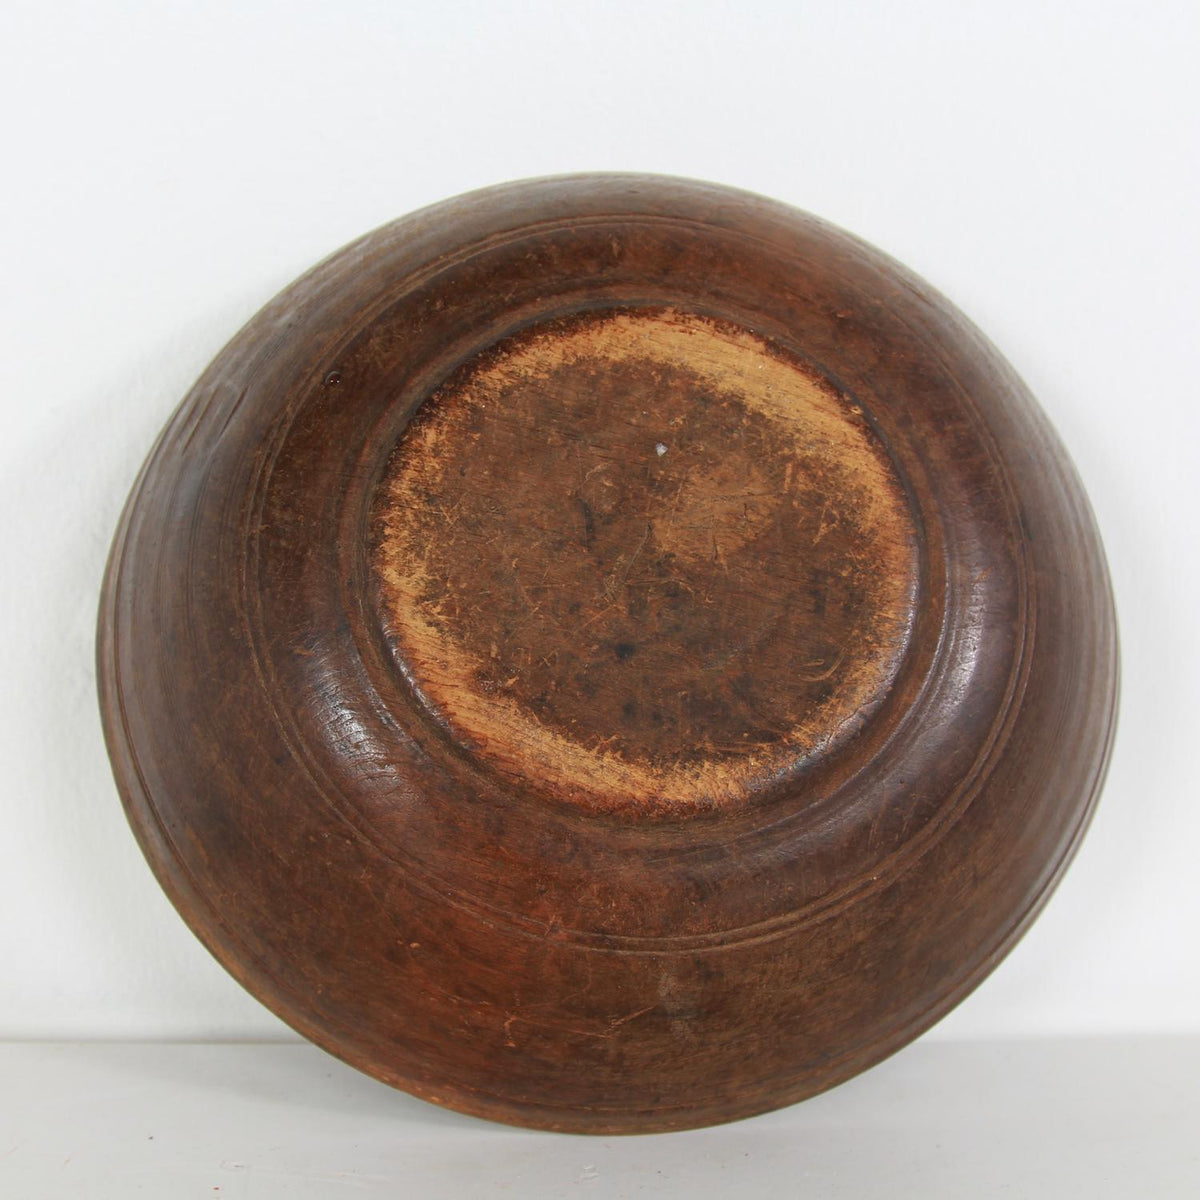 A vERY Appealing  Small Antique Swedish Root Wood Diary Bowl